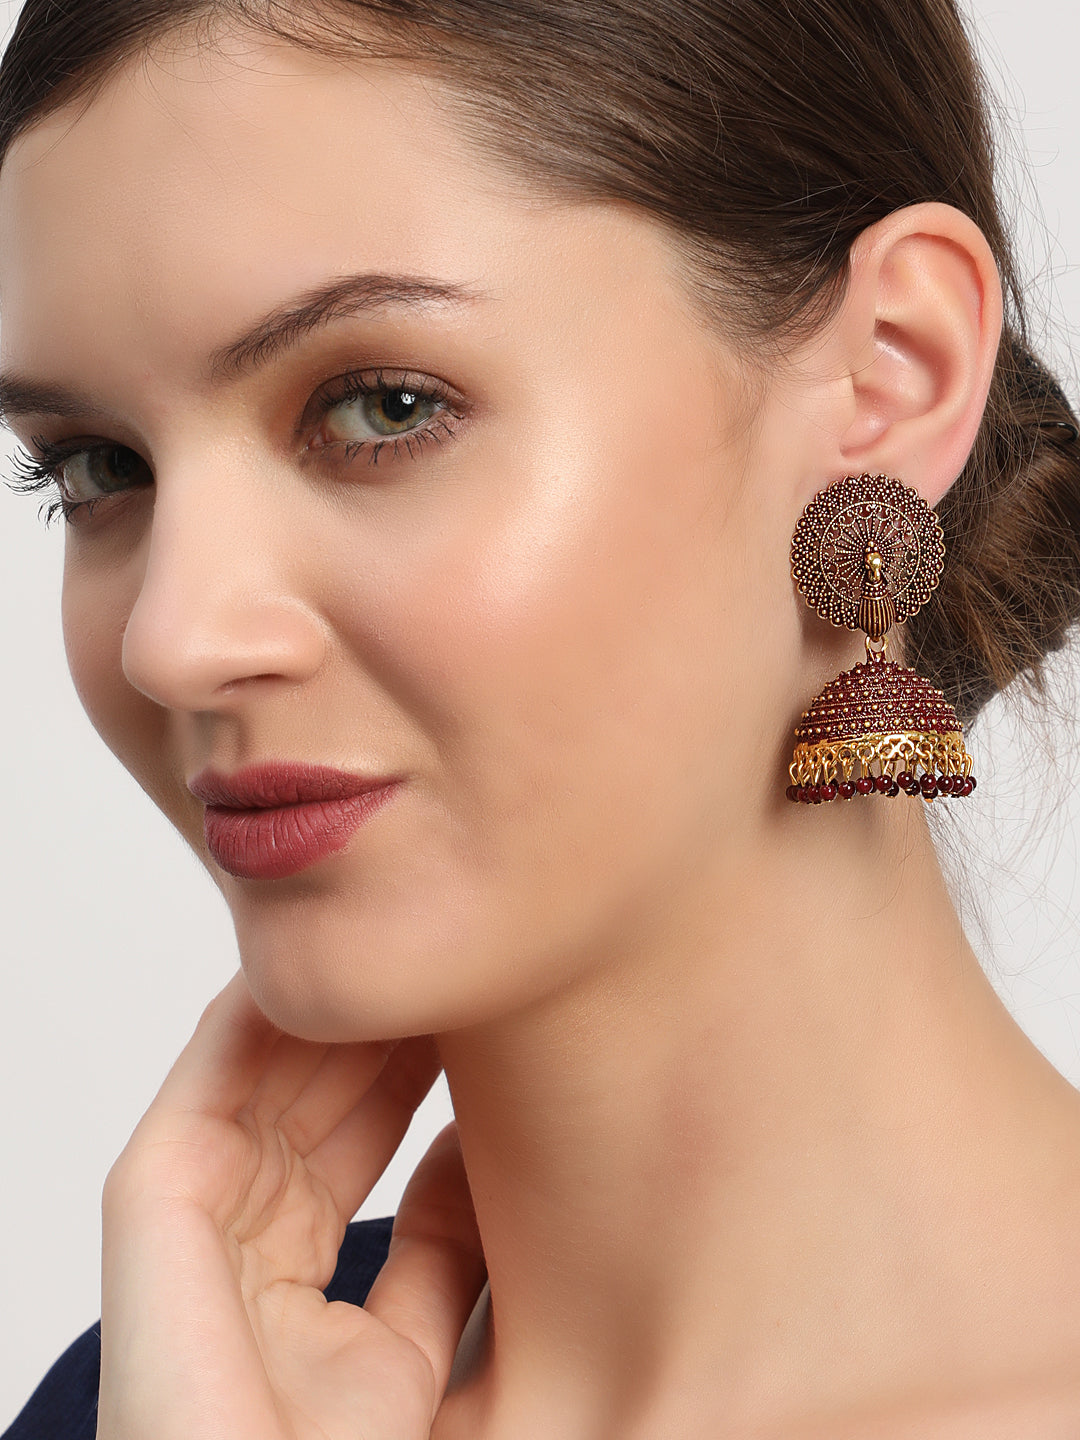 Vintage Gold Jhumka Earrings With Tassel Bells Turkish Tribal Style Water  Drop Design Indian Jewelry For Women From Niceclothingstore, $1.59 |  DHgate.Com